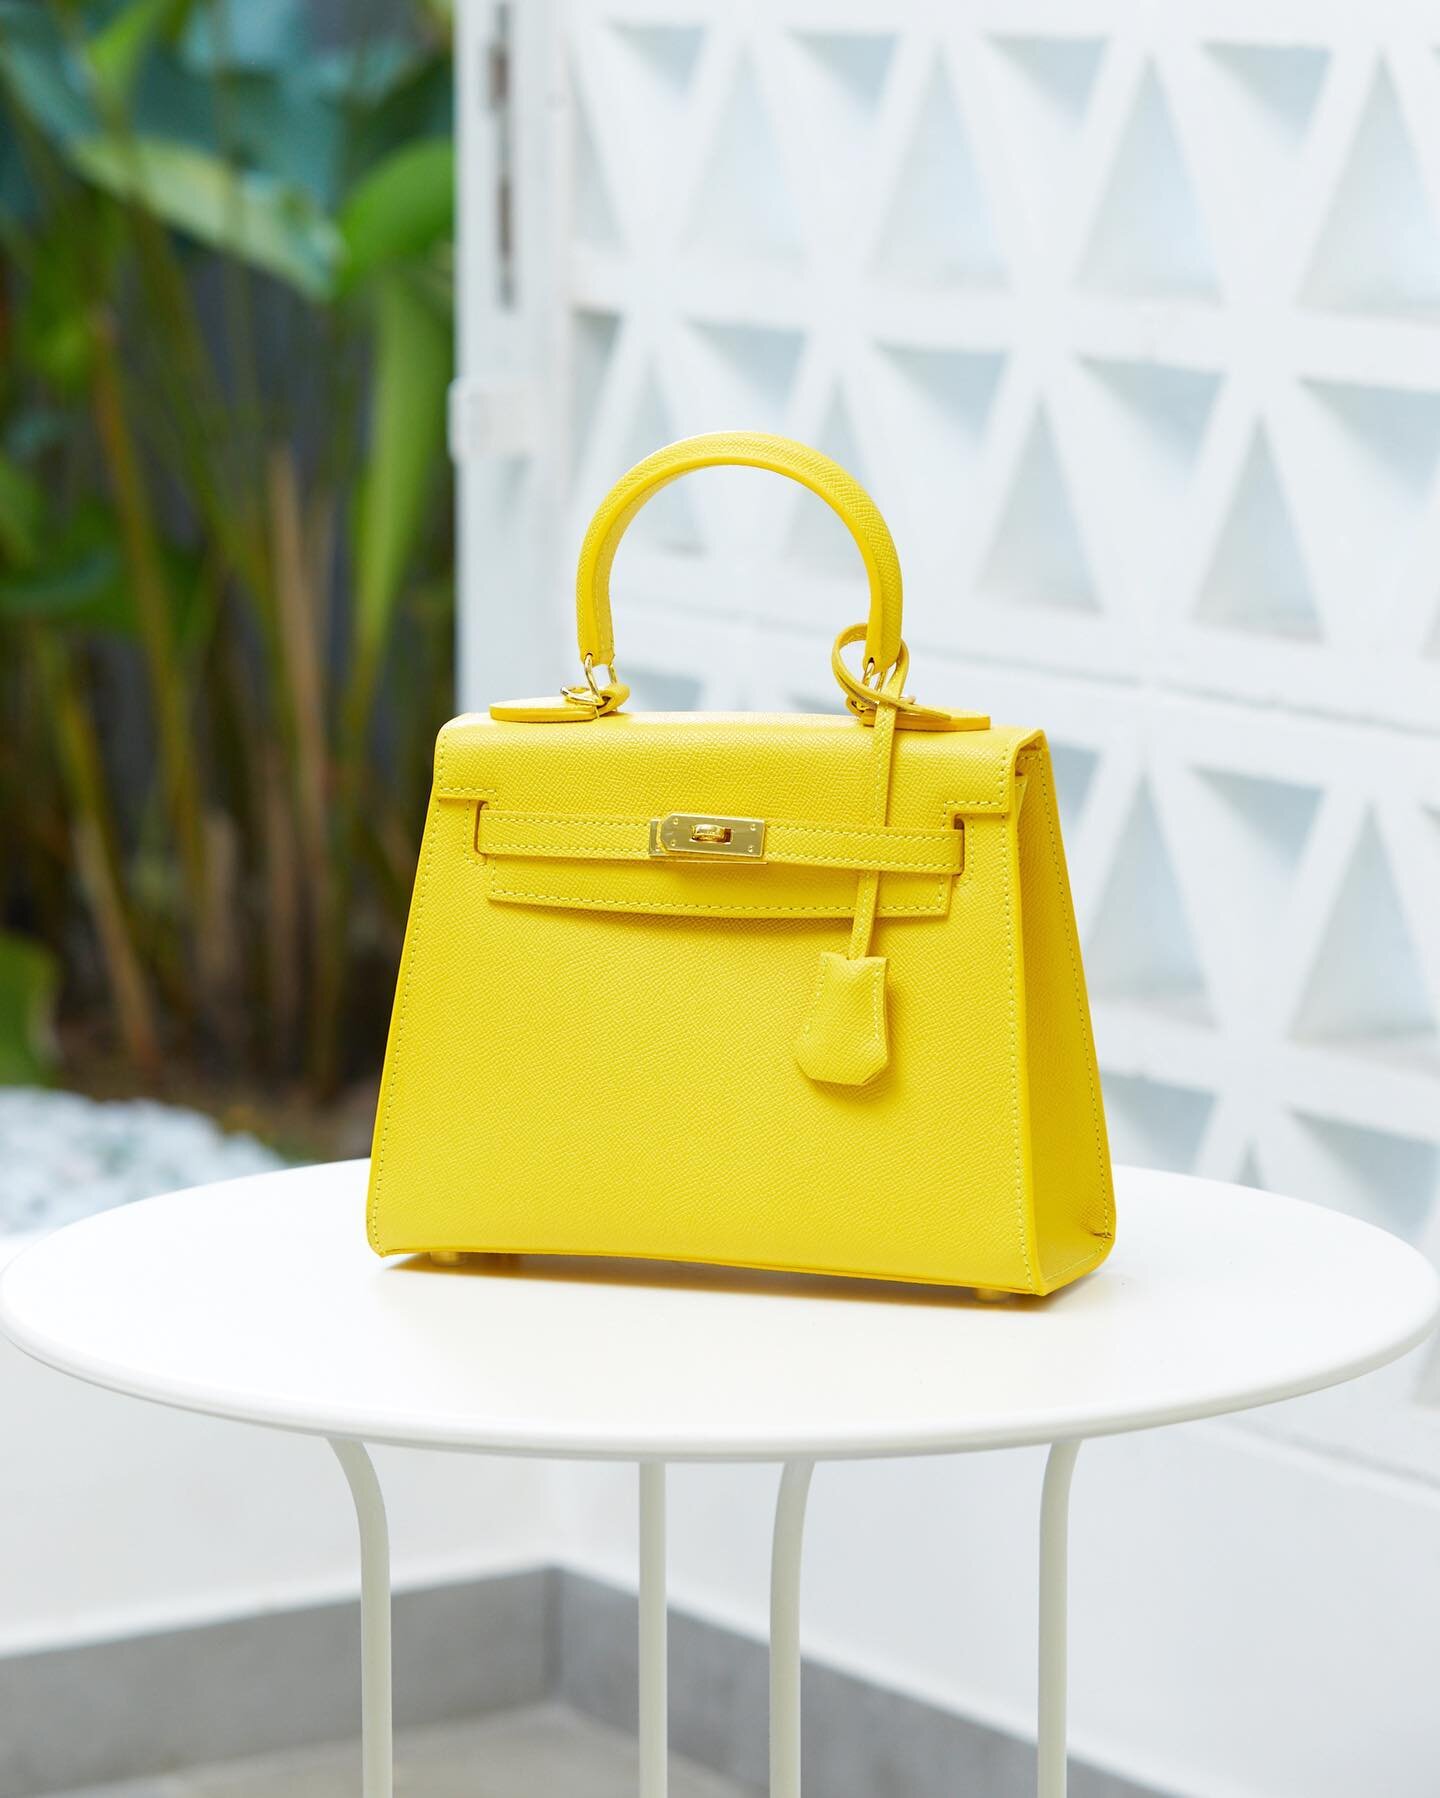 MADELYN SAFFIANO

Exterior:
Genuine Calf Leather in
Saffiano finish
-
Interior:
PU/canvas lining
-
Hardware:
Gold plated metal hardware
-
Comes with a detachable long leather strap
-
Measurements:
Size 25 x 20 x 10cm
Price: RM520
-
Size: 28 x 22 x 12